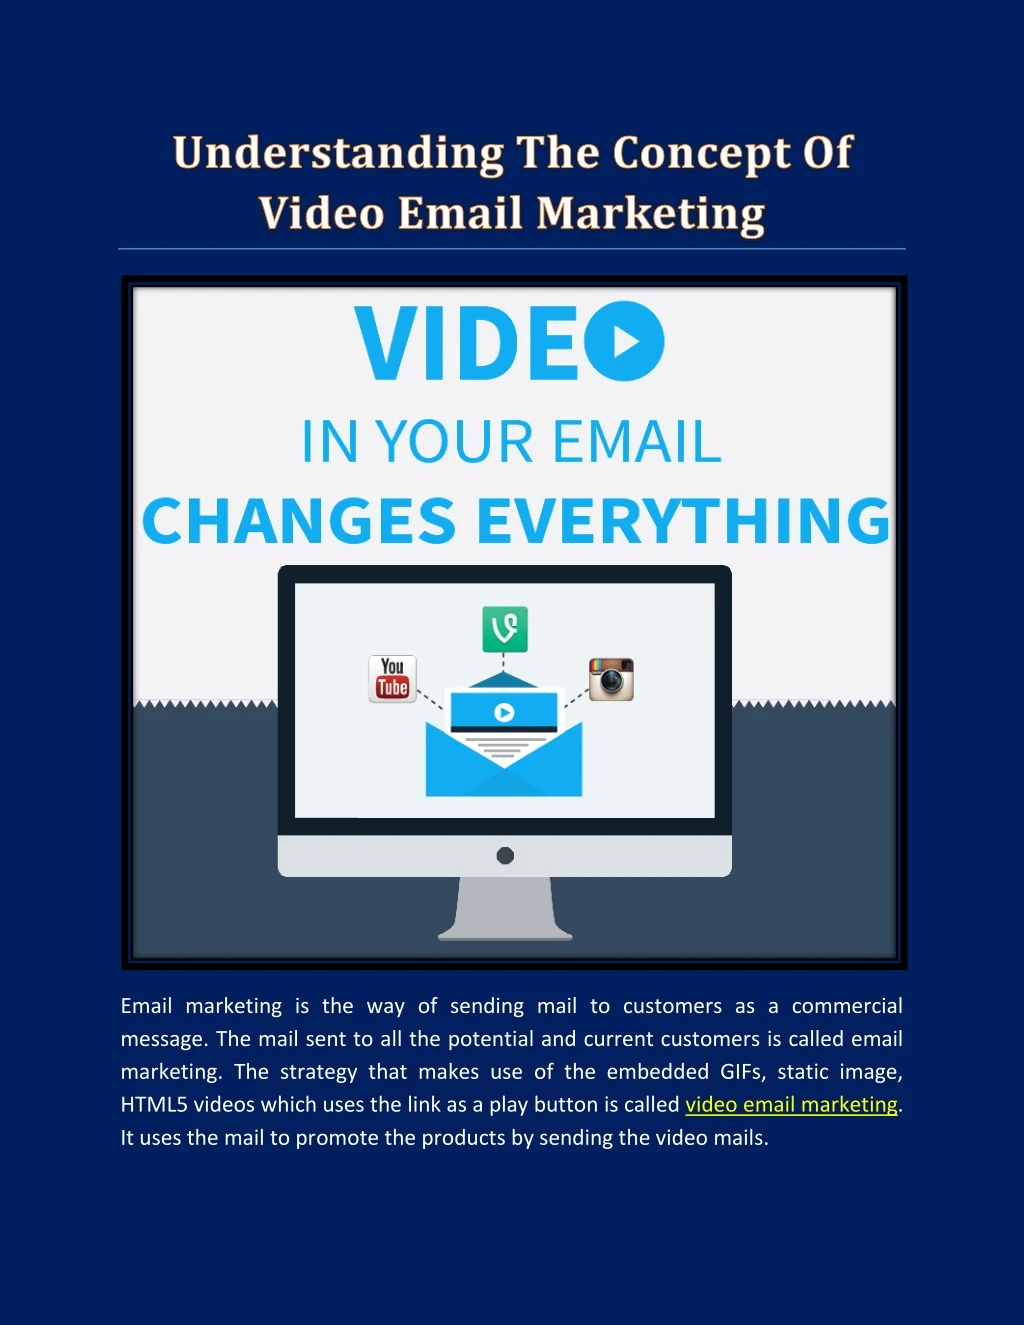 email marketing is the way of sending mail